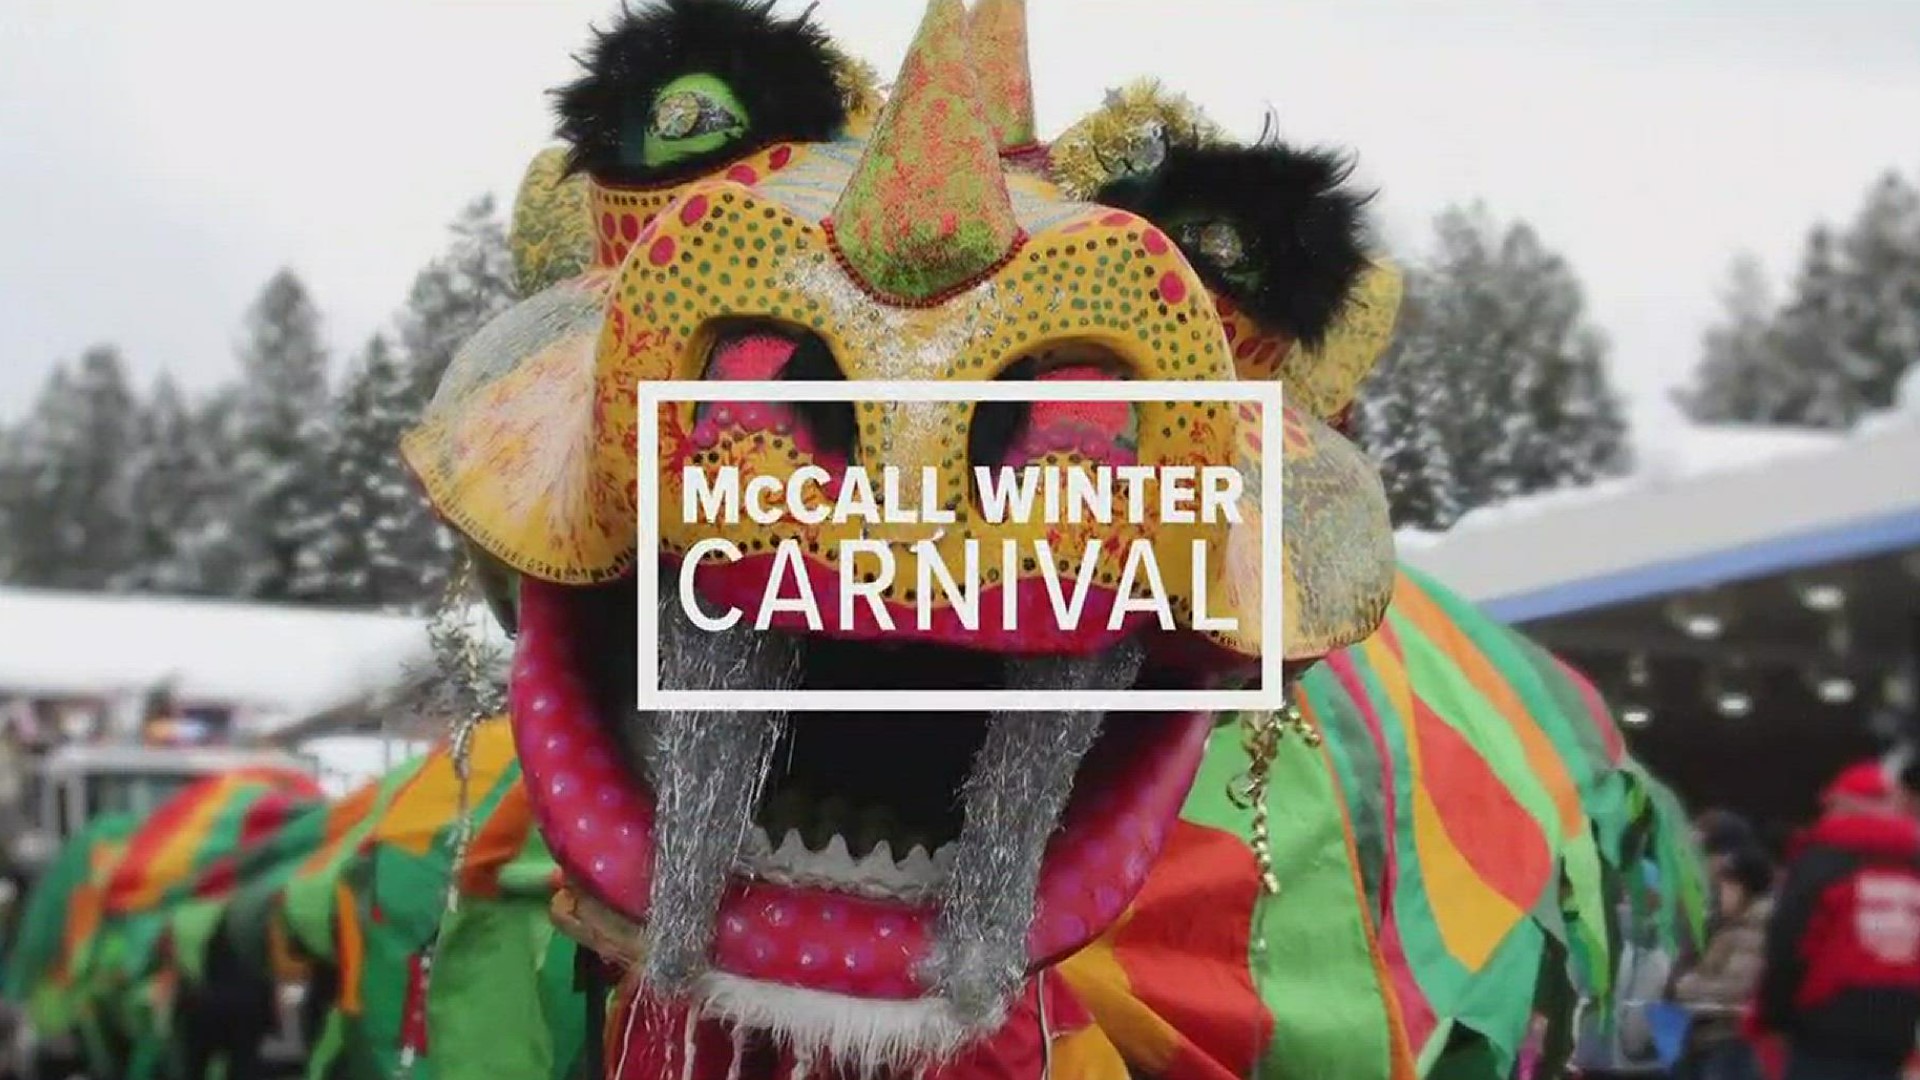 The Mardi Gras Parade is back in McCall after it was canceled last winter due to COVID-19 concerns. The event includes candy, music and more!